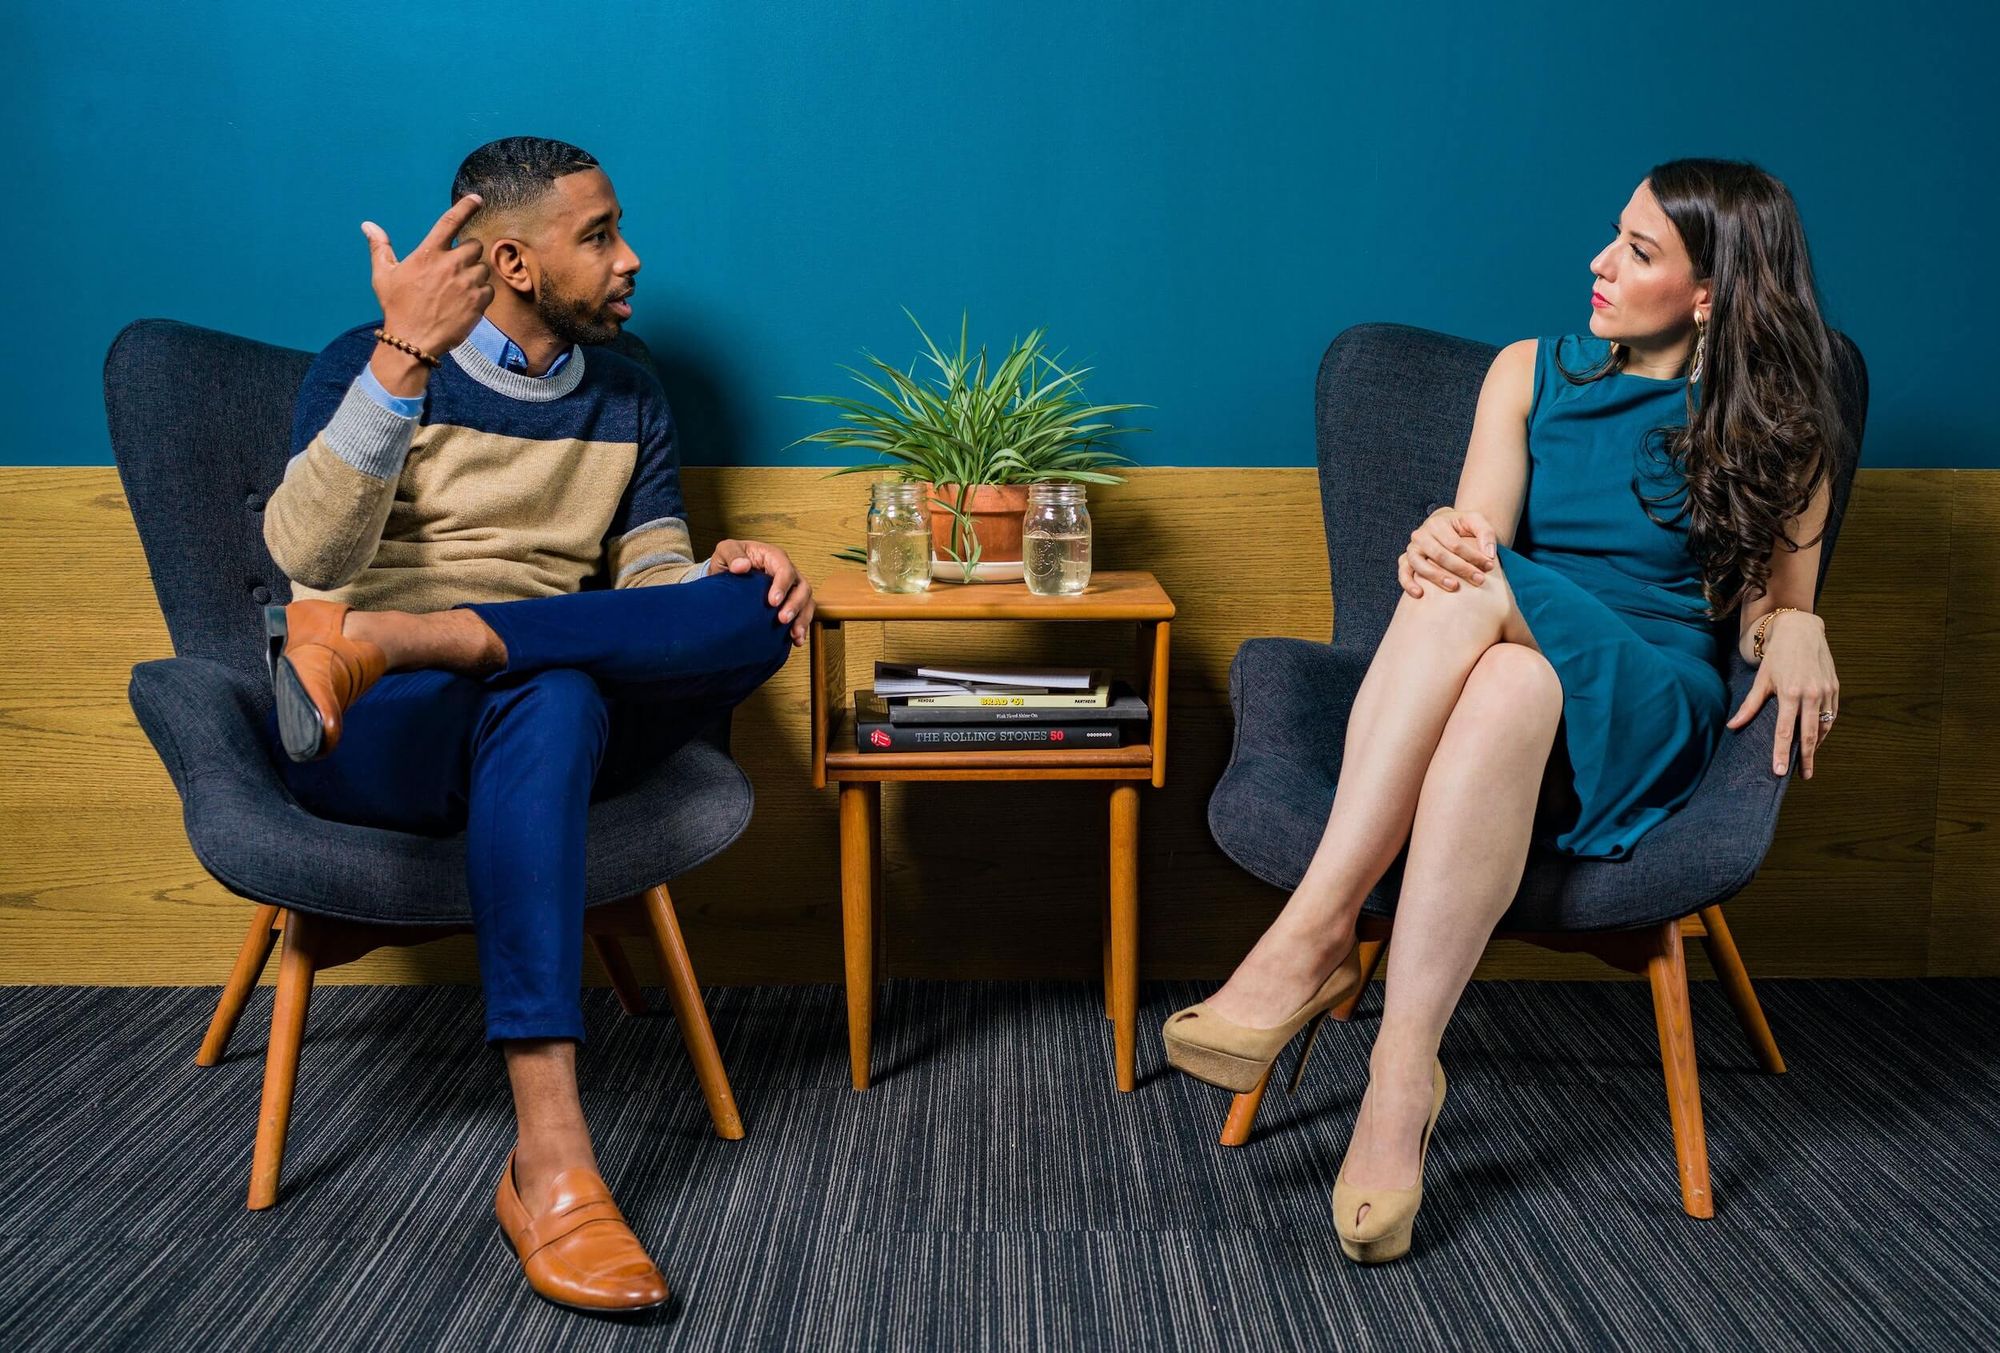 Man and woman in smart attire seated in low armchairs having a conversation.